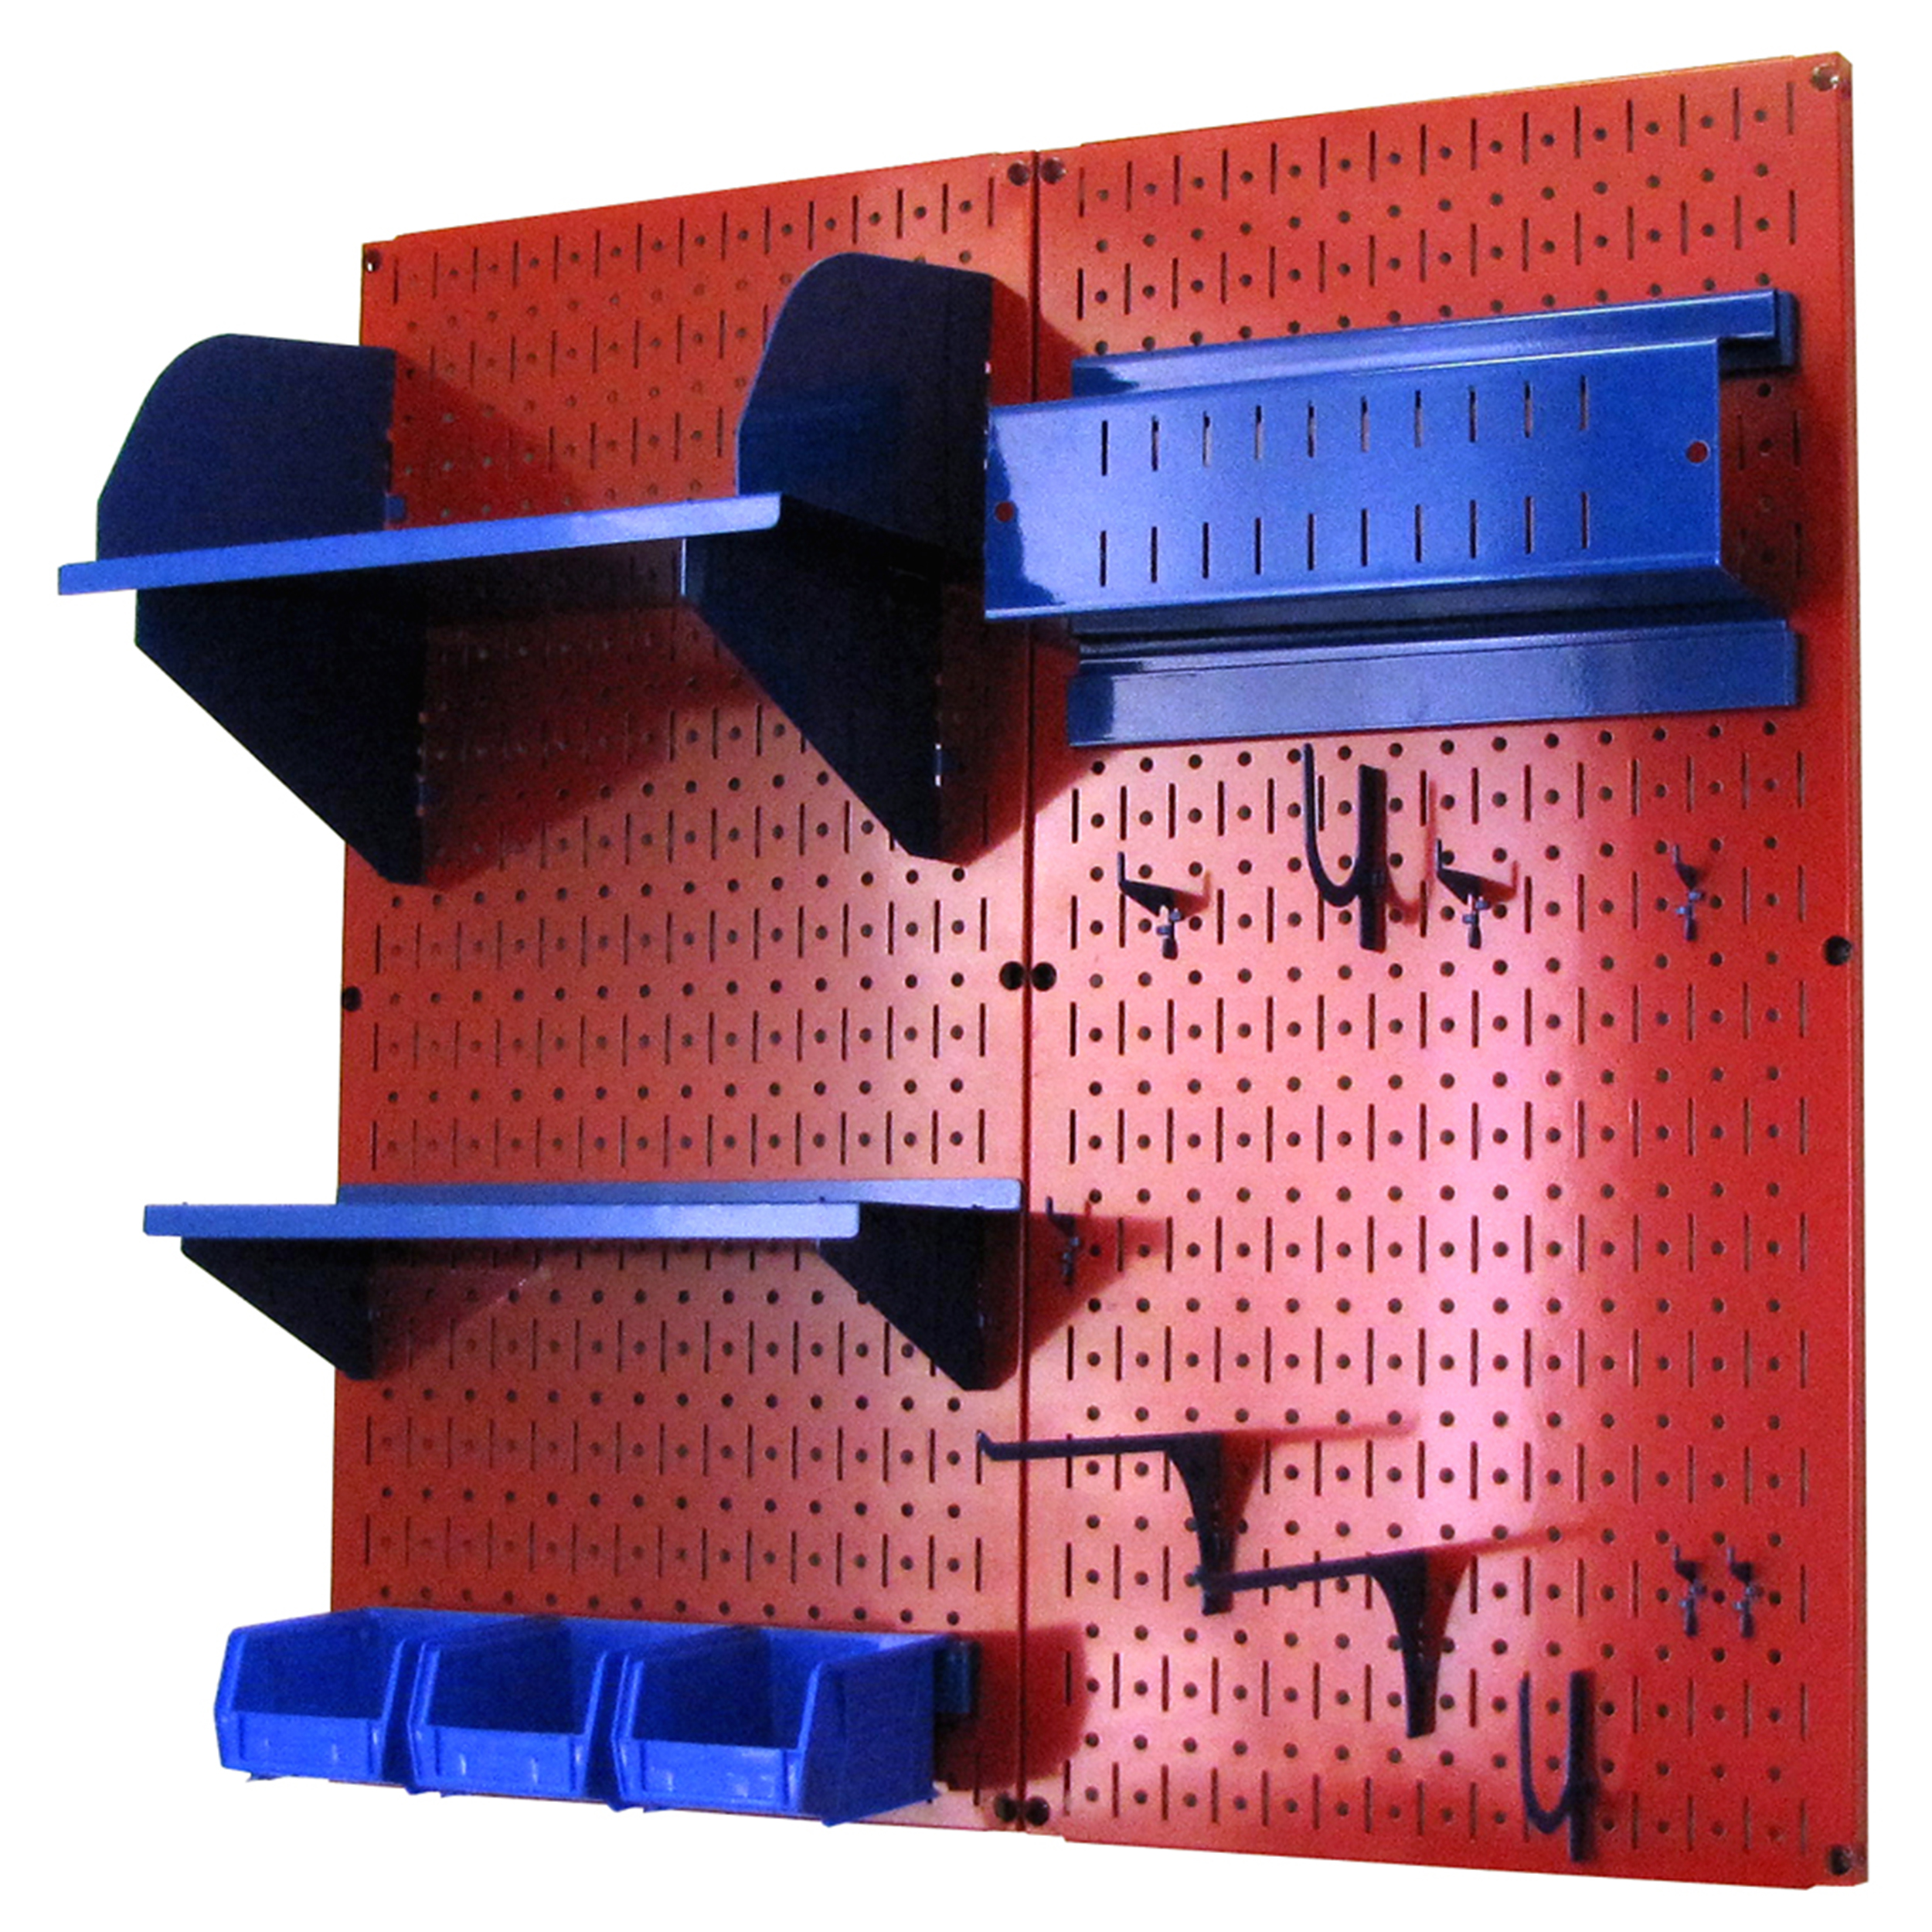 Pegboard Hobby Craft Pegboard Organizer Storage Kit With Red Pegboard And Blue Accessories